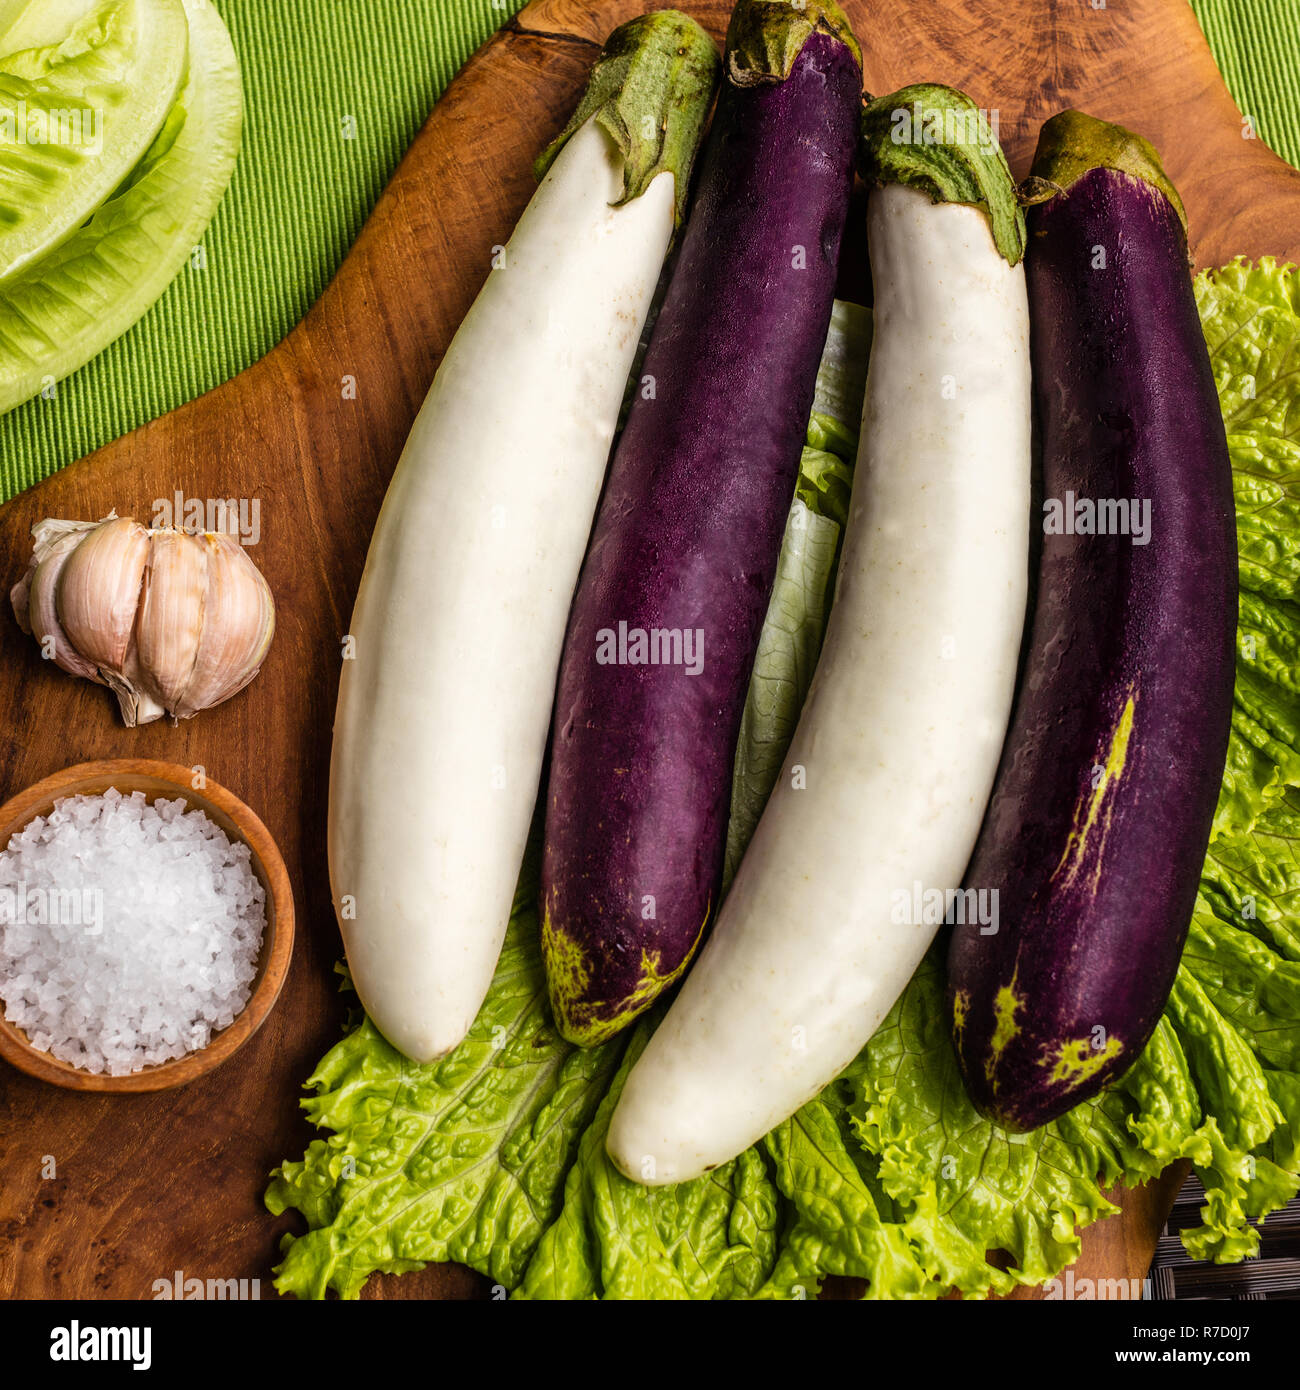 Fresh white and purple eggplant, lettuce and Romaine lettuce, chilly, cloves of garlic and wooden pot with sea salt on a wooden chopping board. Stock Photo